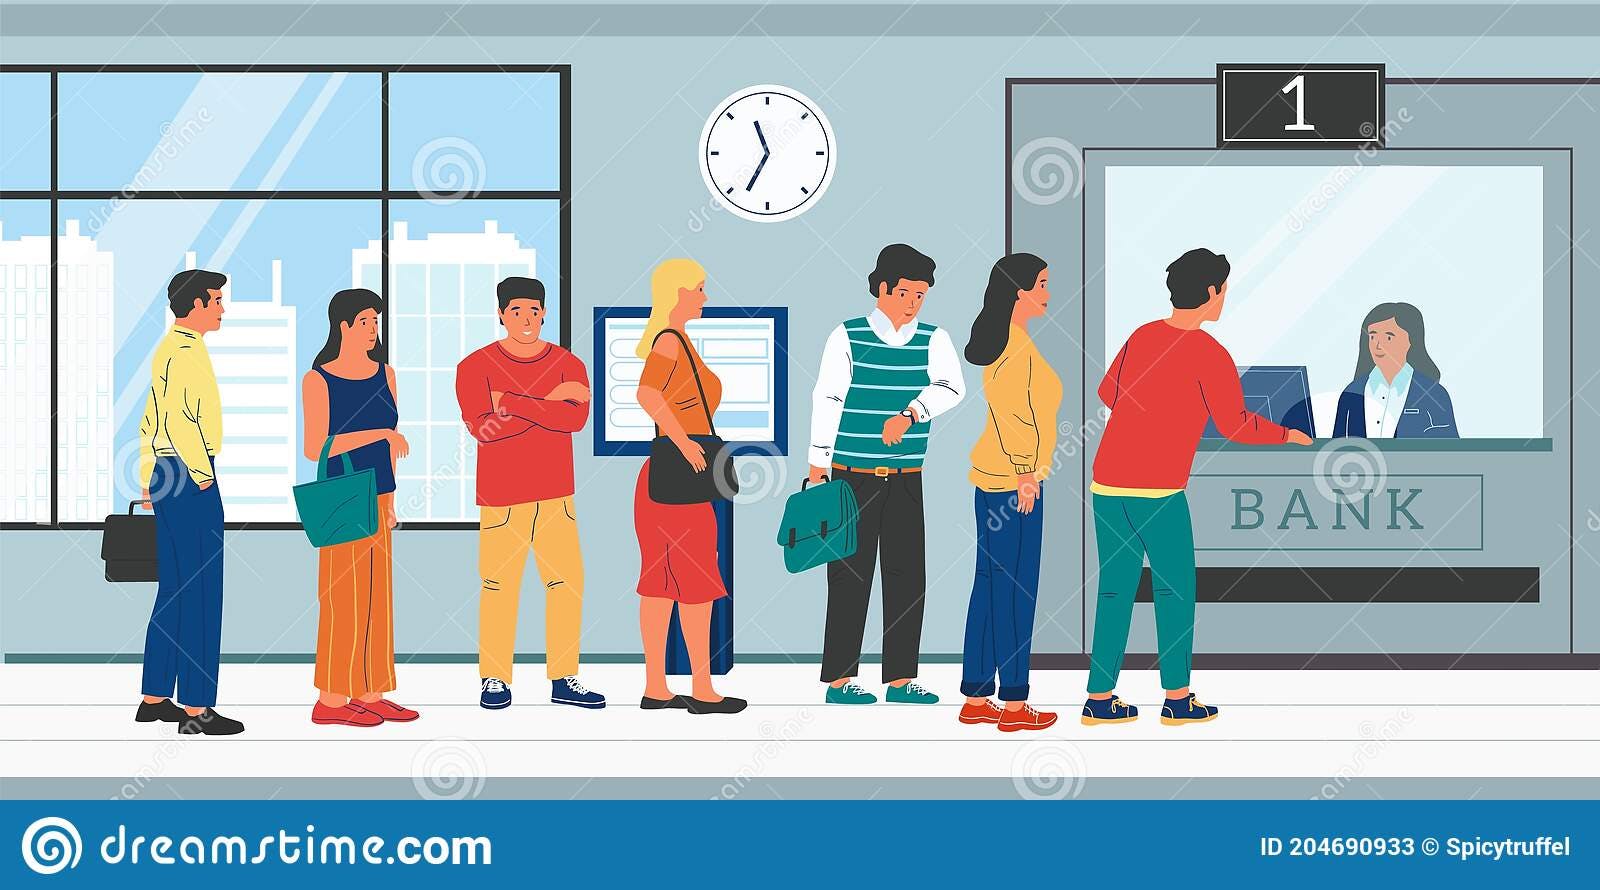 bank-queue-people-standing-row-to-worker-clients-verifying-payments-vector-cartoon-characters-waiting-line-cashier-men-204690933.jpg